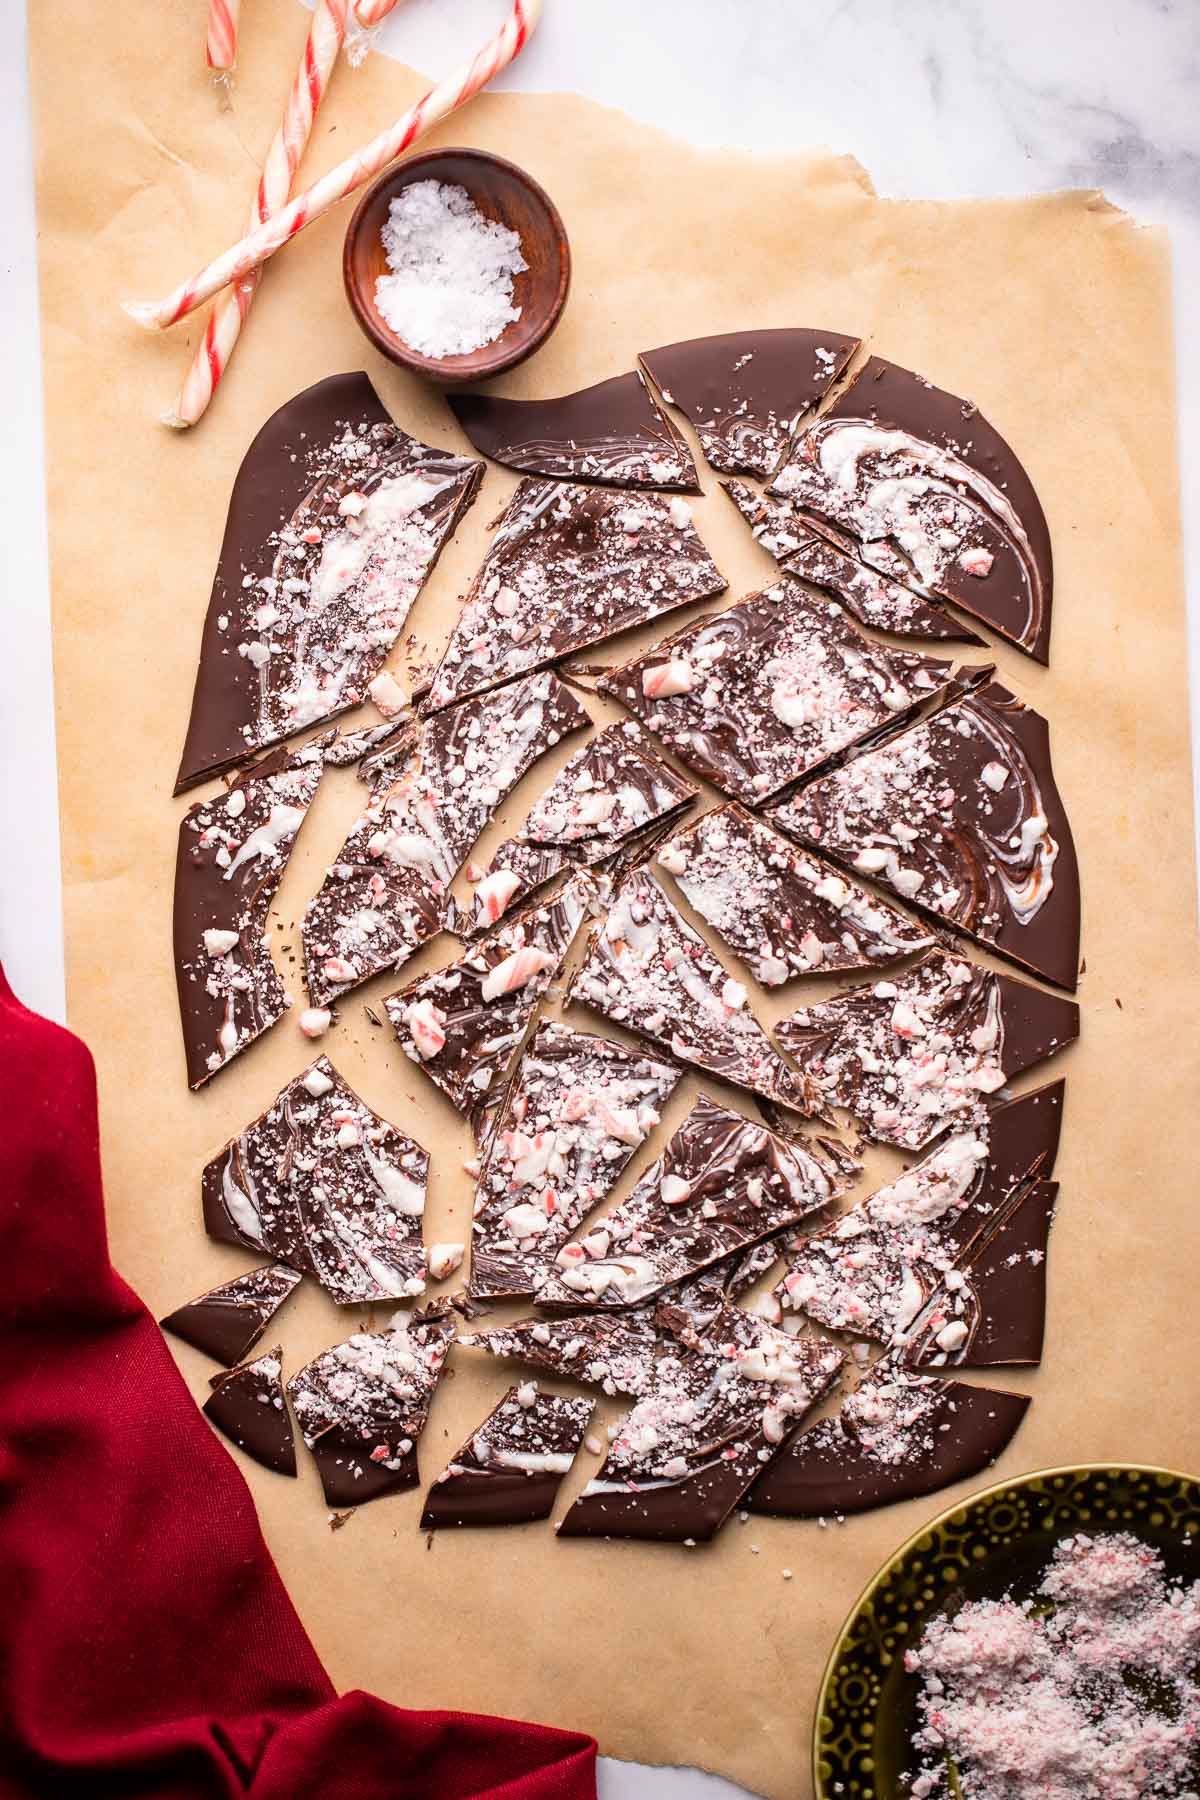 peppermint chocolate bark broken into pieces on a piece of parchment.